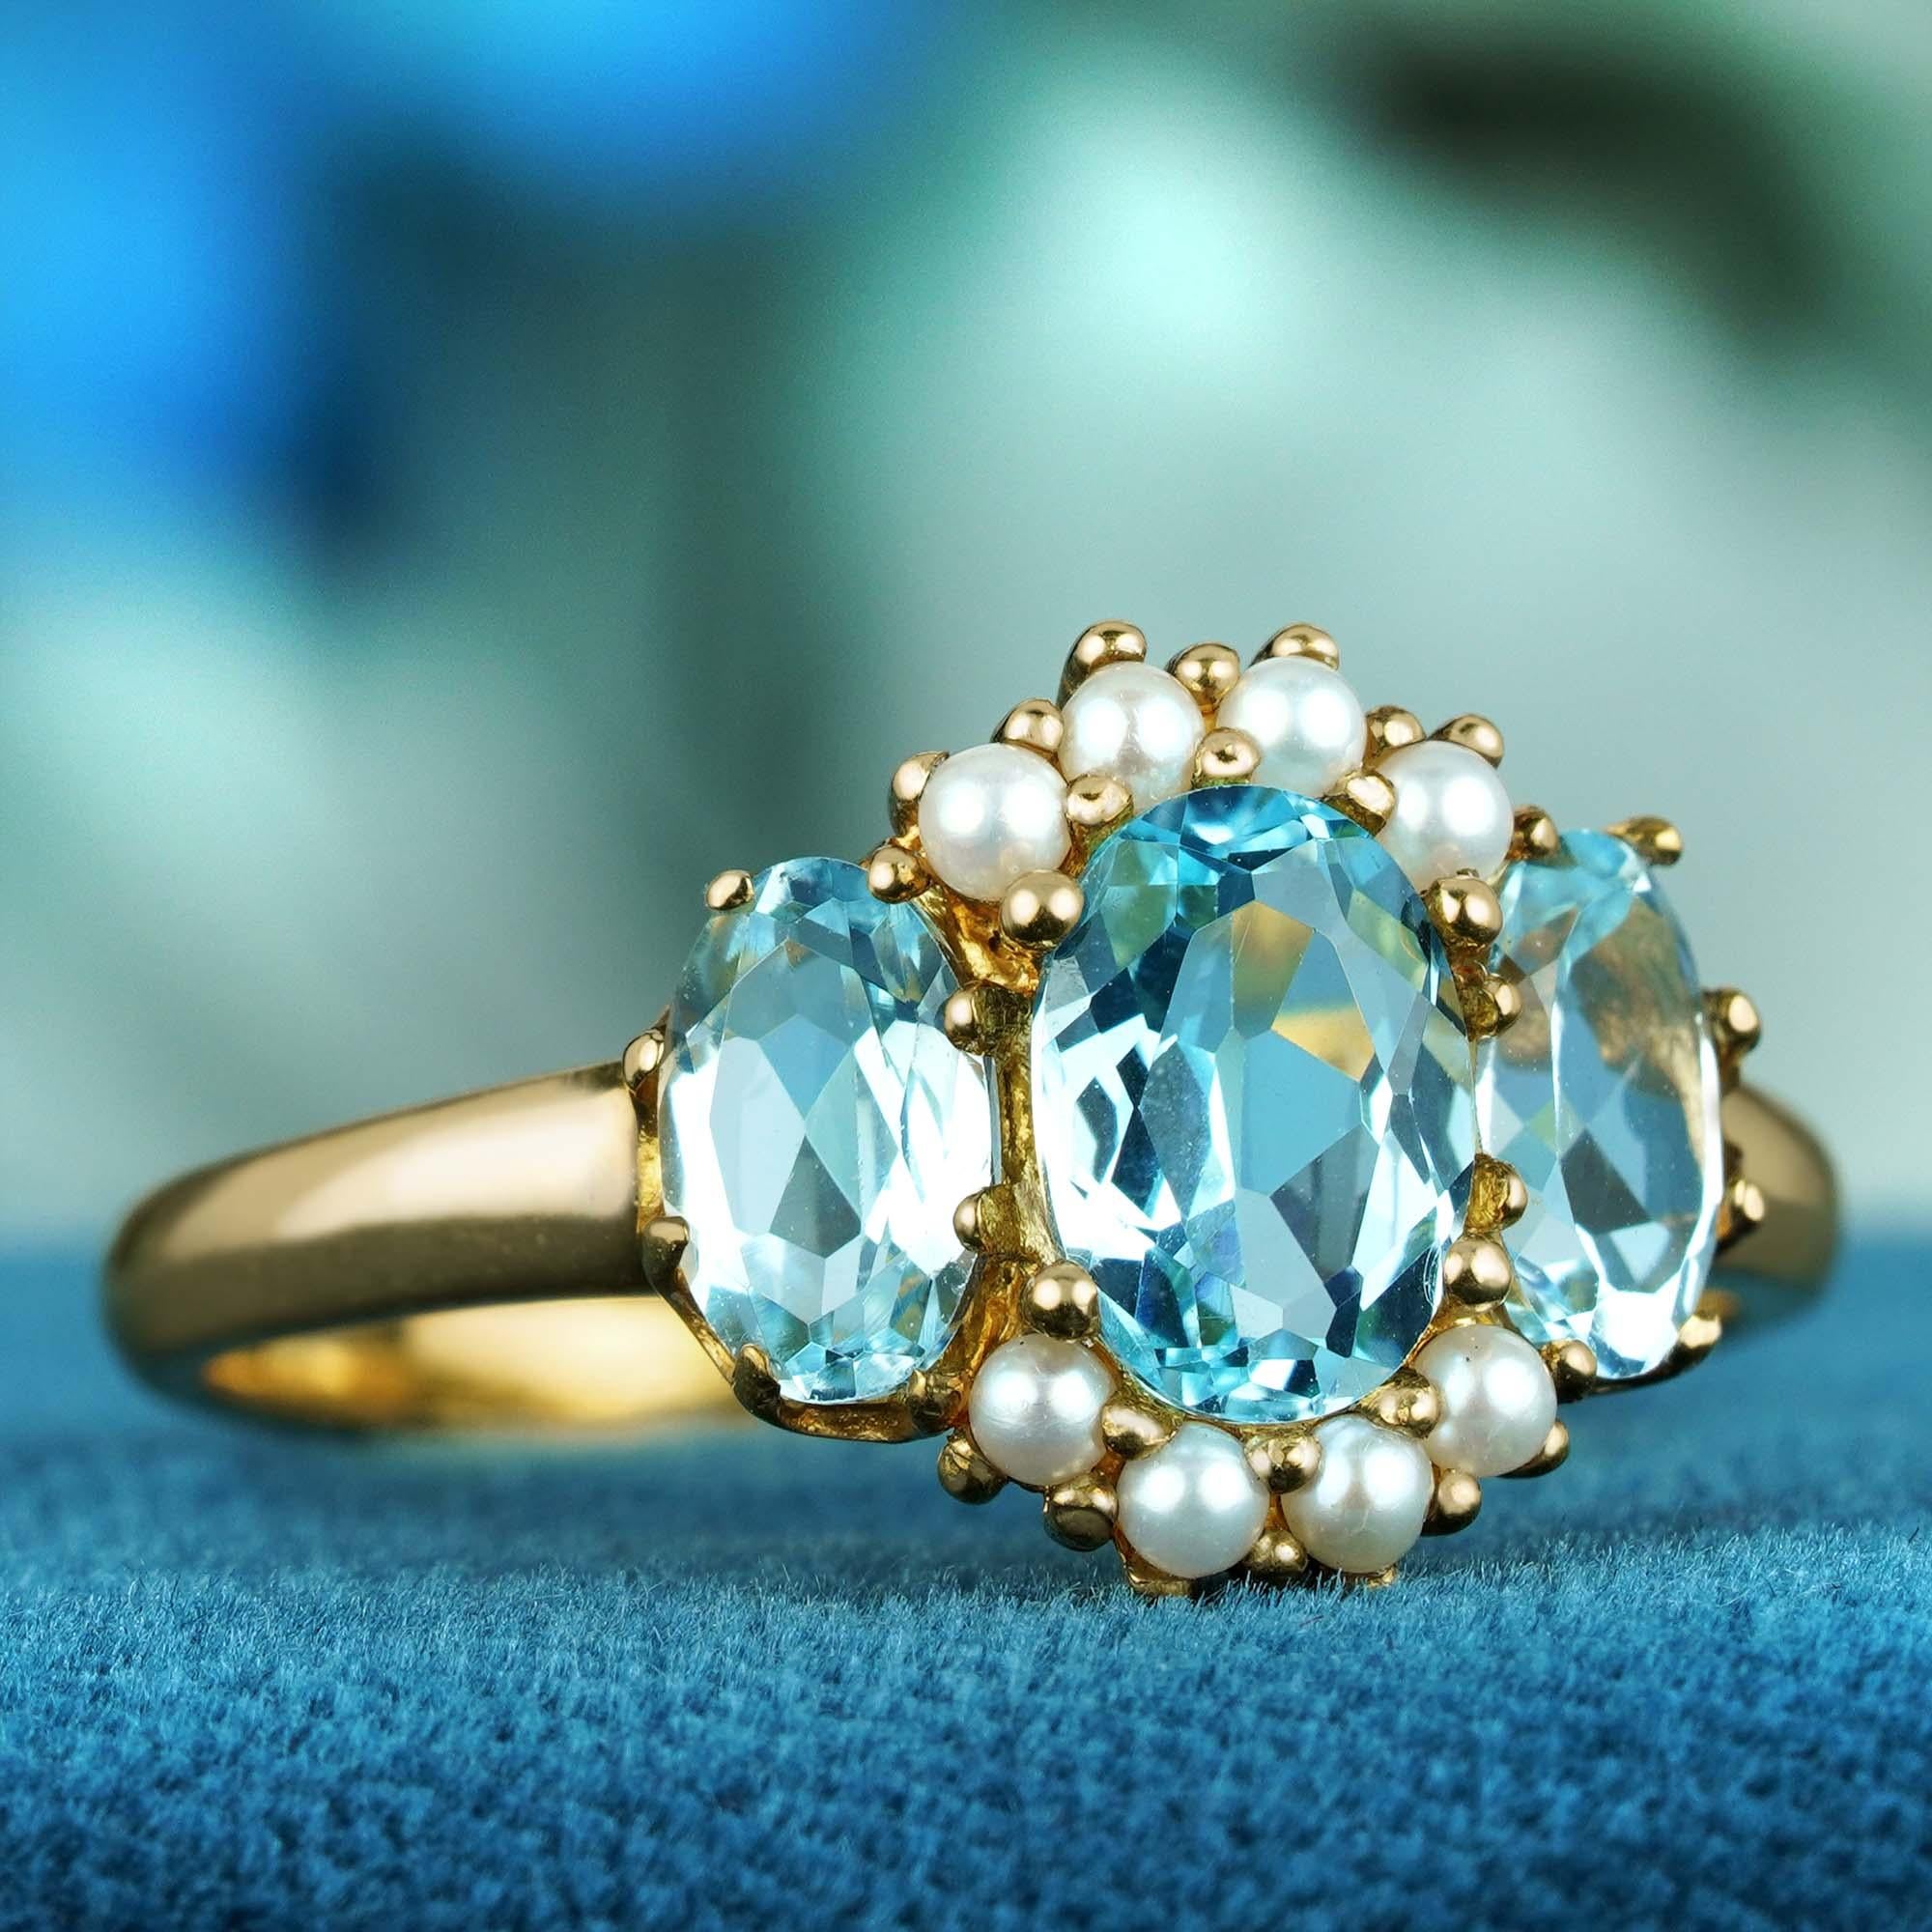 For Sale:  Natural Blue Topaz and Pearl Vintage Style Three Stone Ring in Solid 9K Gold 2